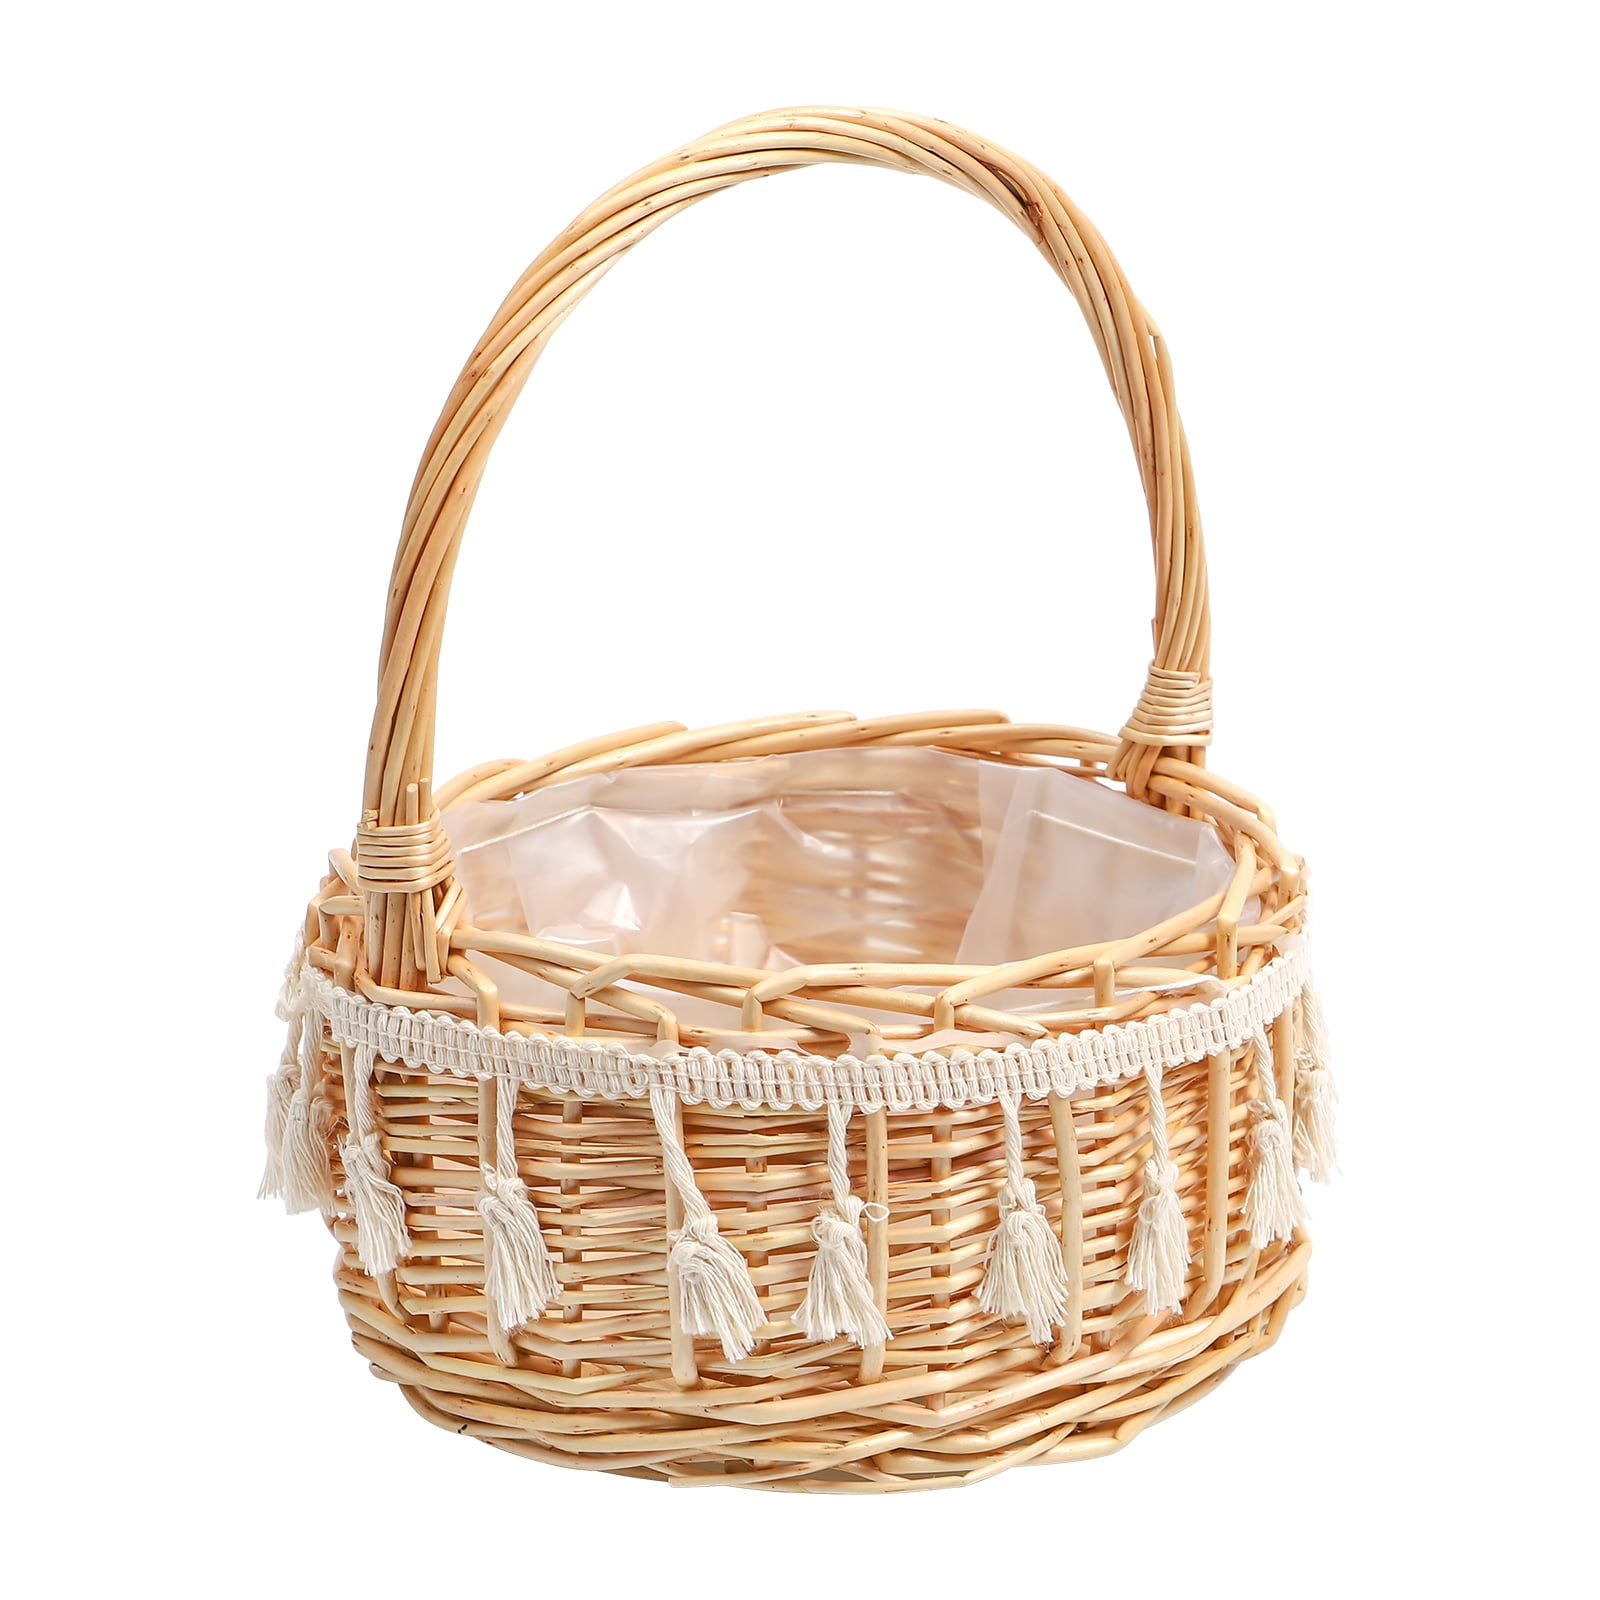 24 Pack Mini Woven Baskets with Handles - Bulk Miniature Baskets for  Favors, Arts and Crafts, School Projects (2x3 in)